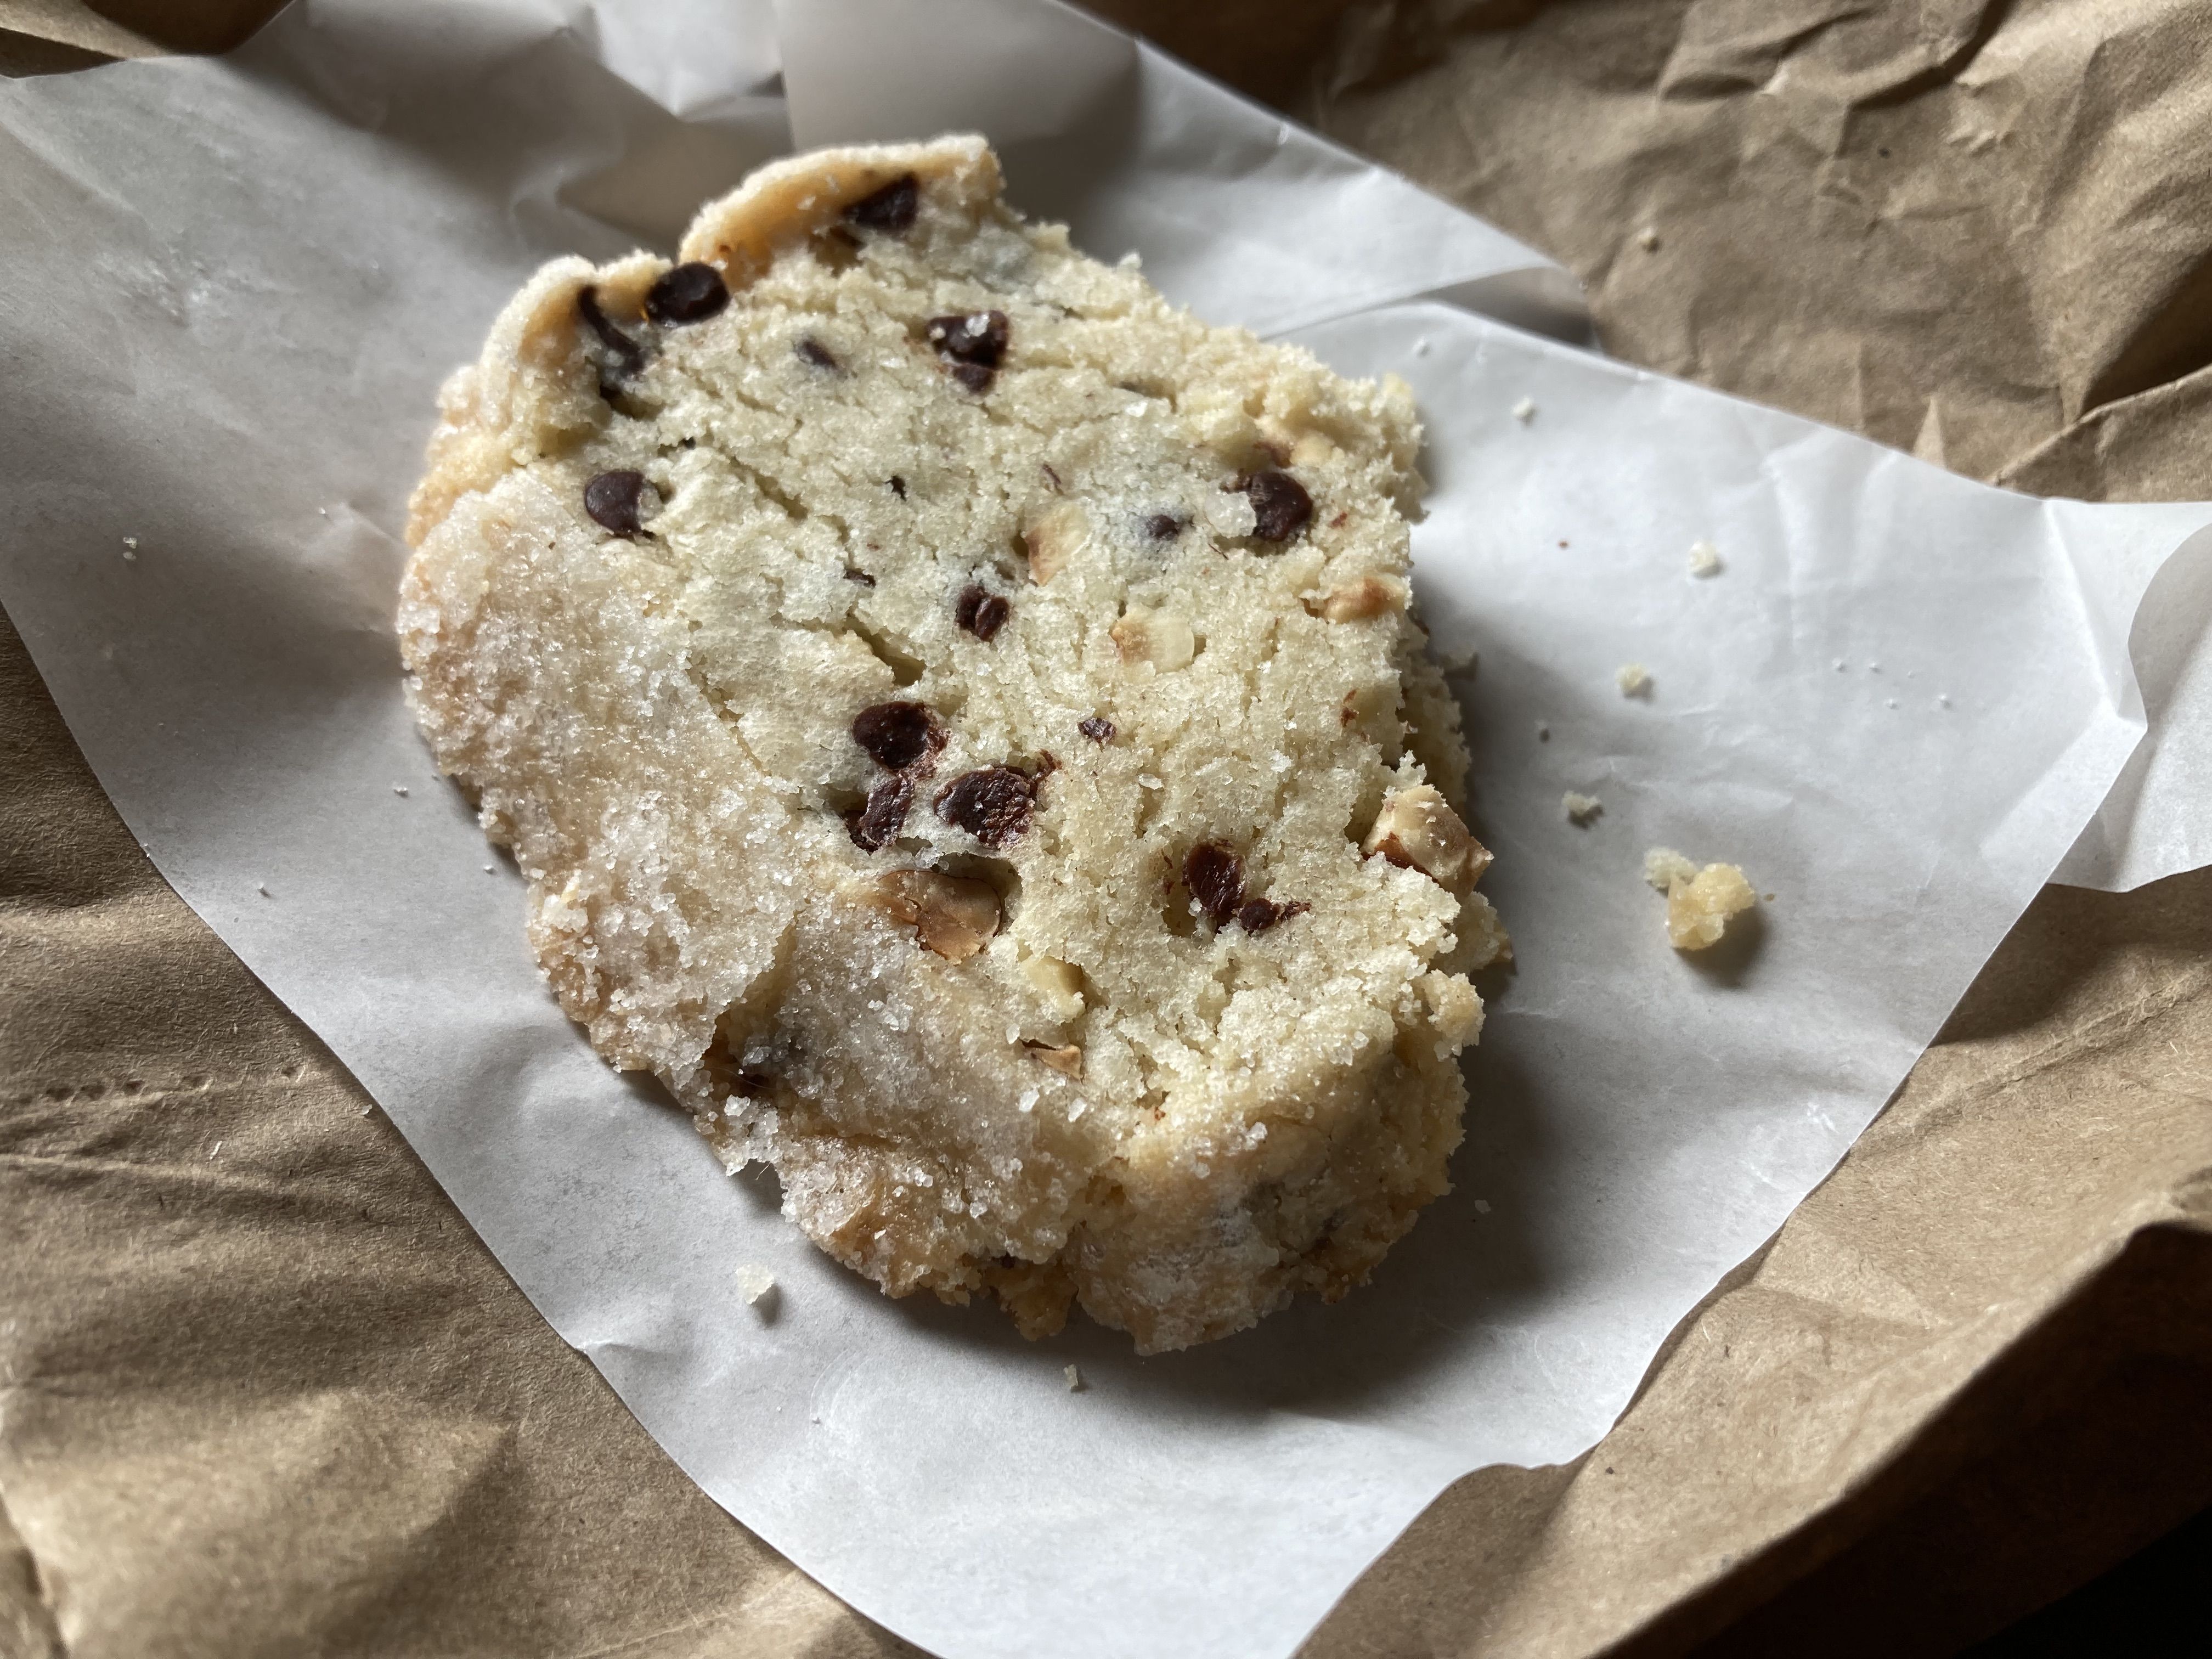 Part of a chocolate chip butter cookie, with crumbs, on a paper wrapper.